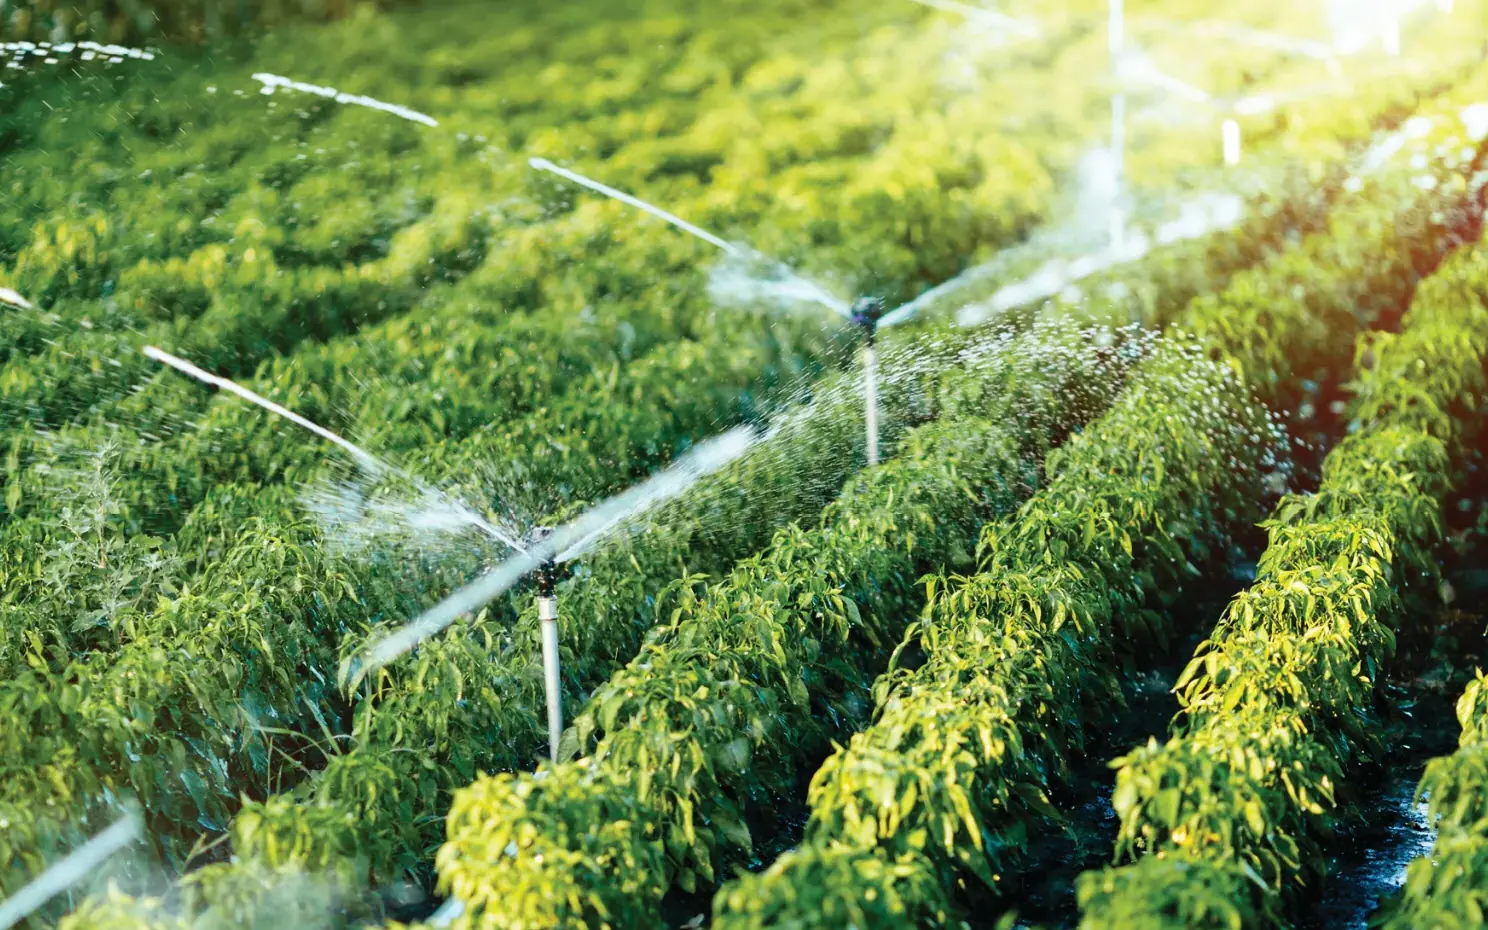 How to Protect Your Irrigation System From Emitter Clogging